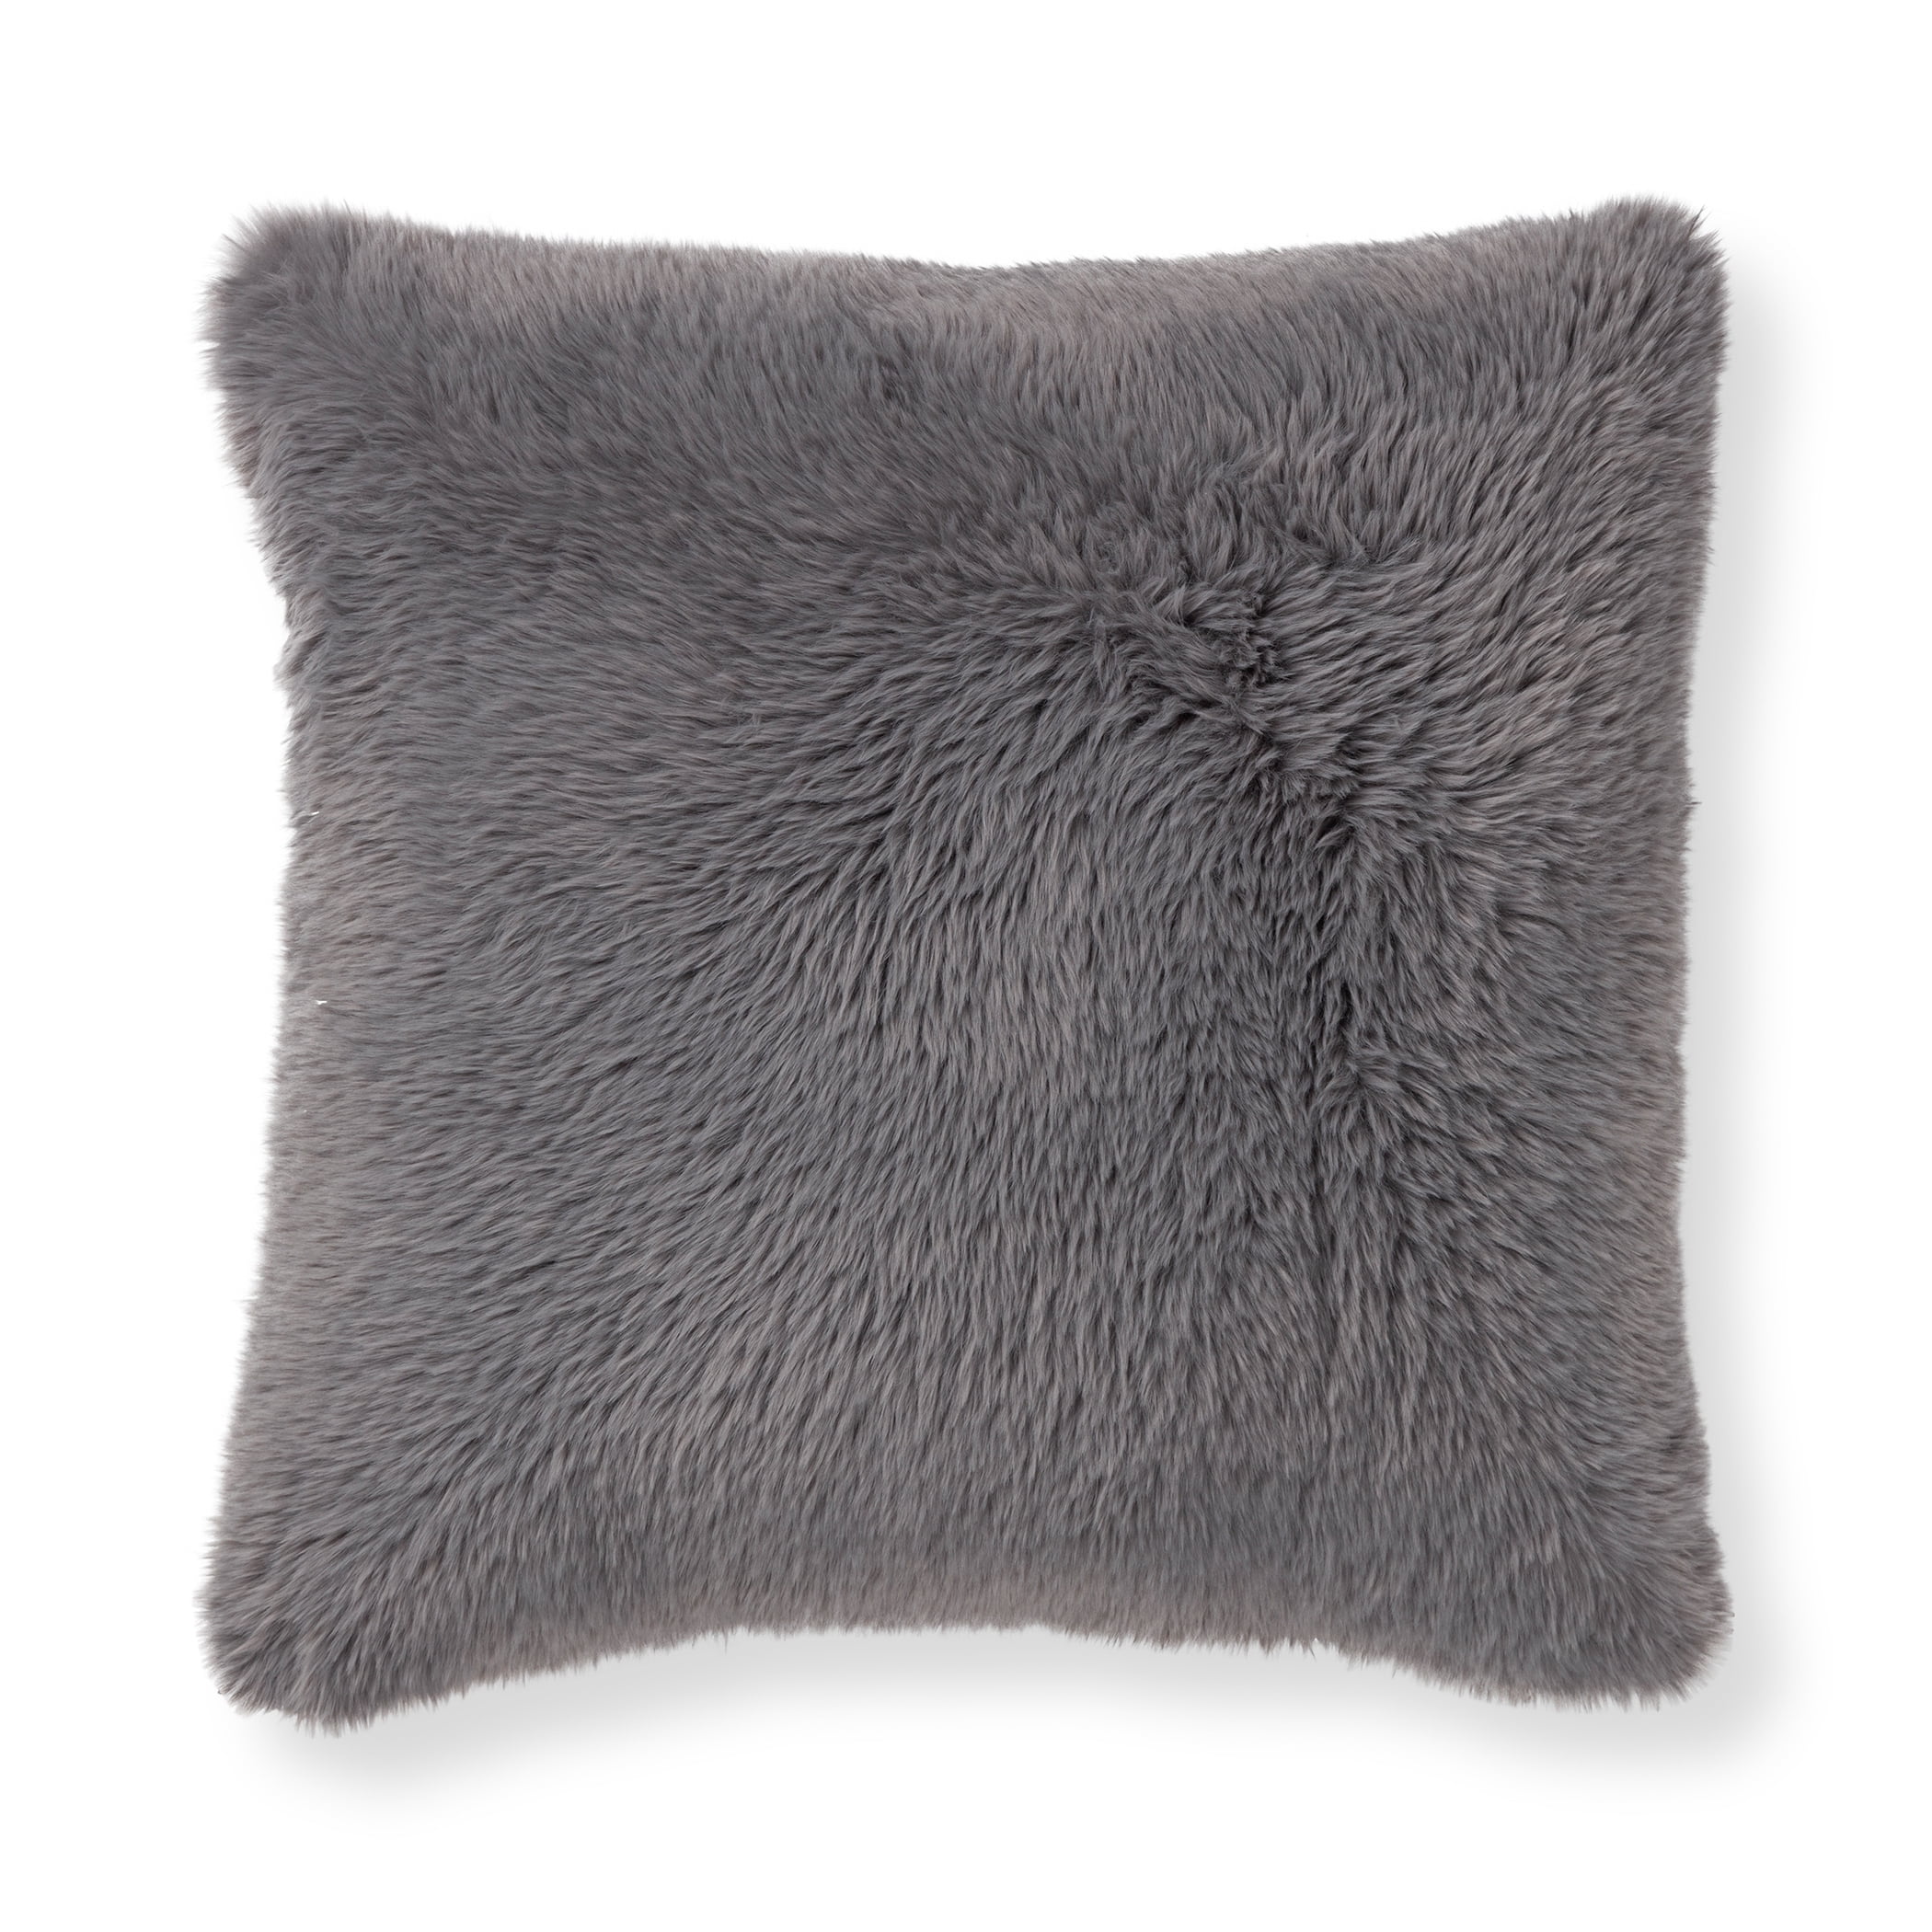 Mainstays Super Lux Shag Faux Fur Gray Pillow, 19 in x 19 in, Square